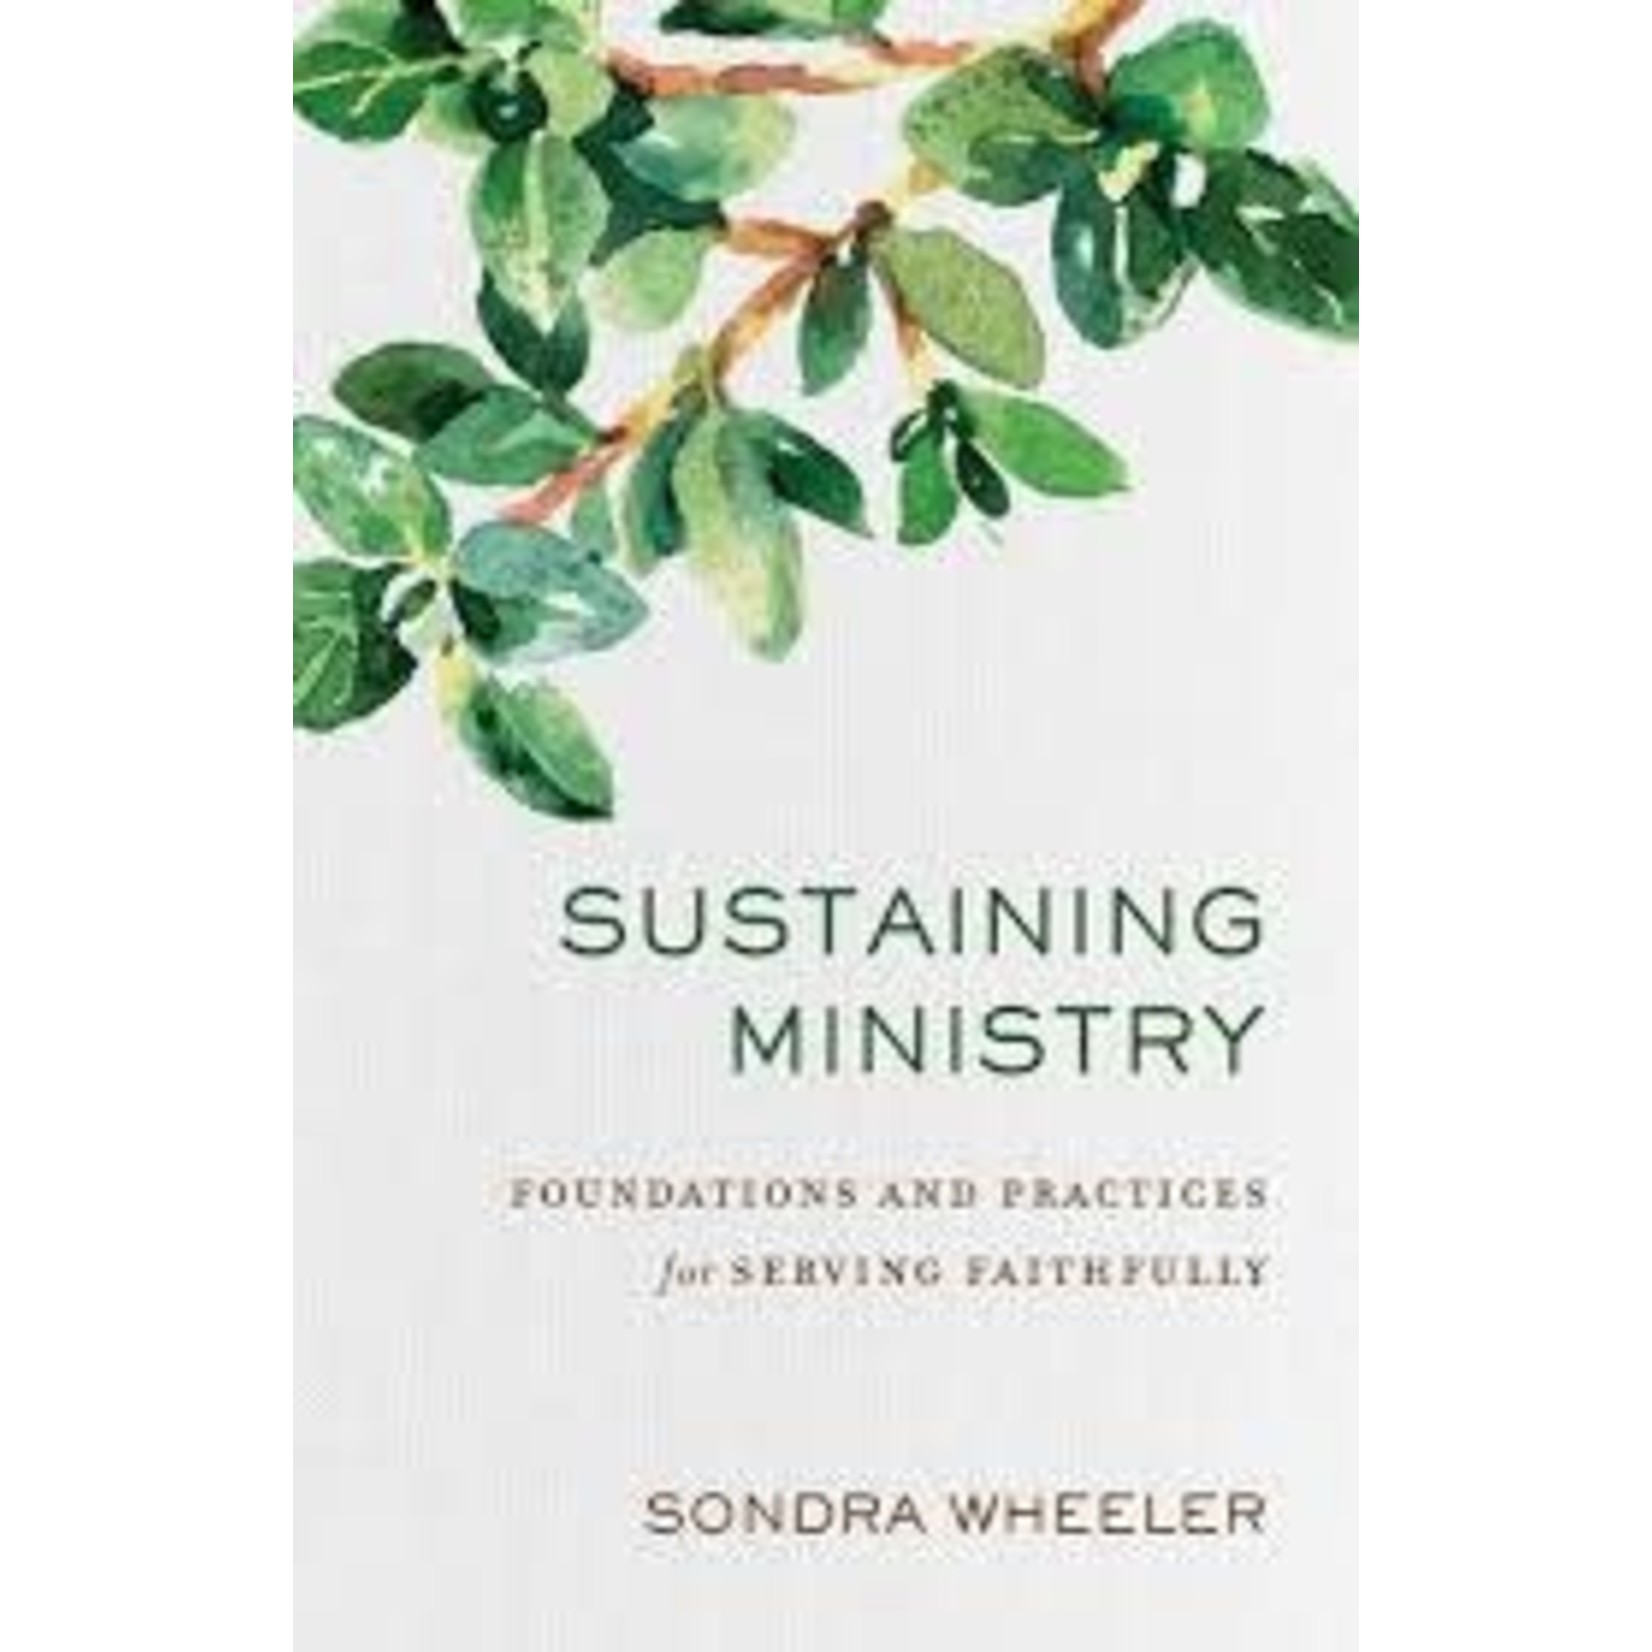 Sustaining Ministry: Foundations and Practices